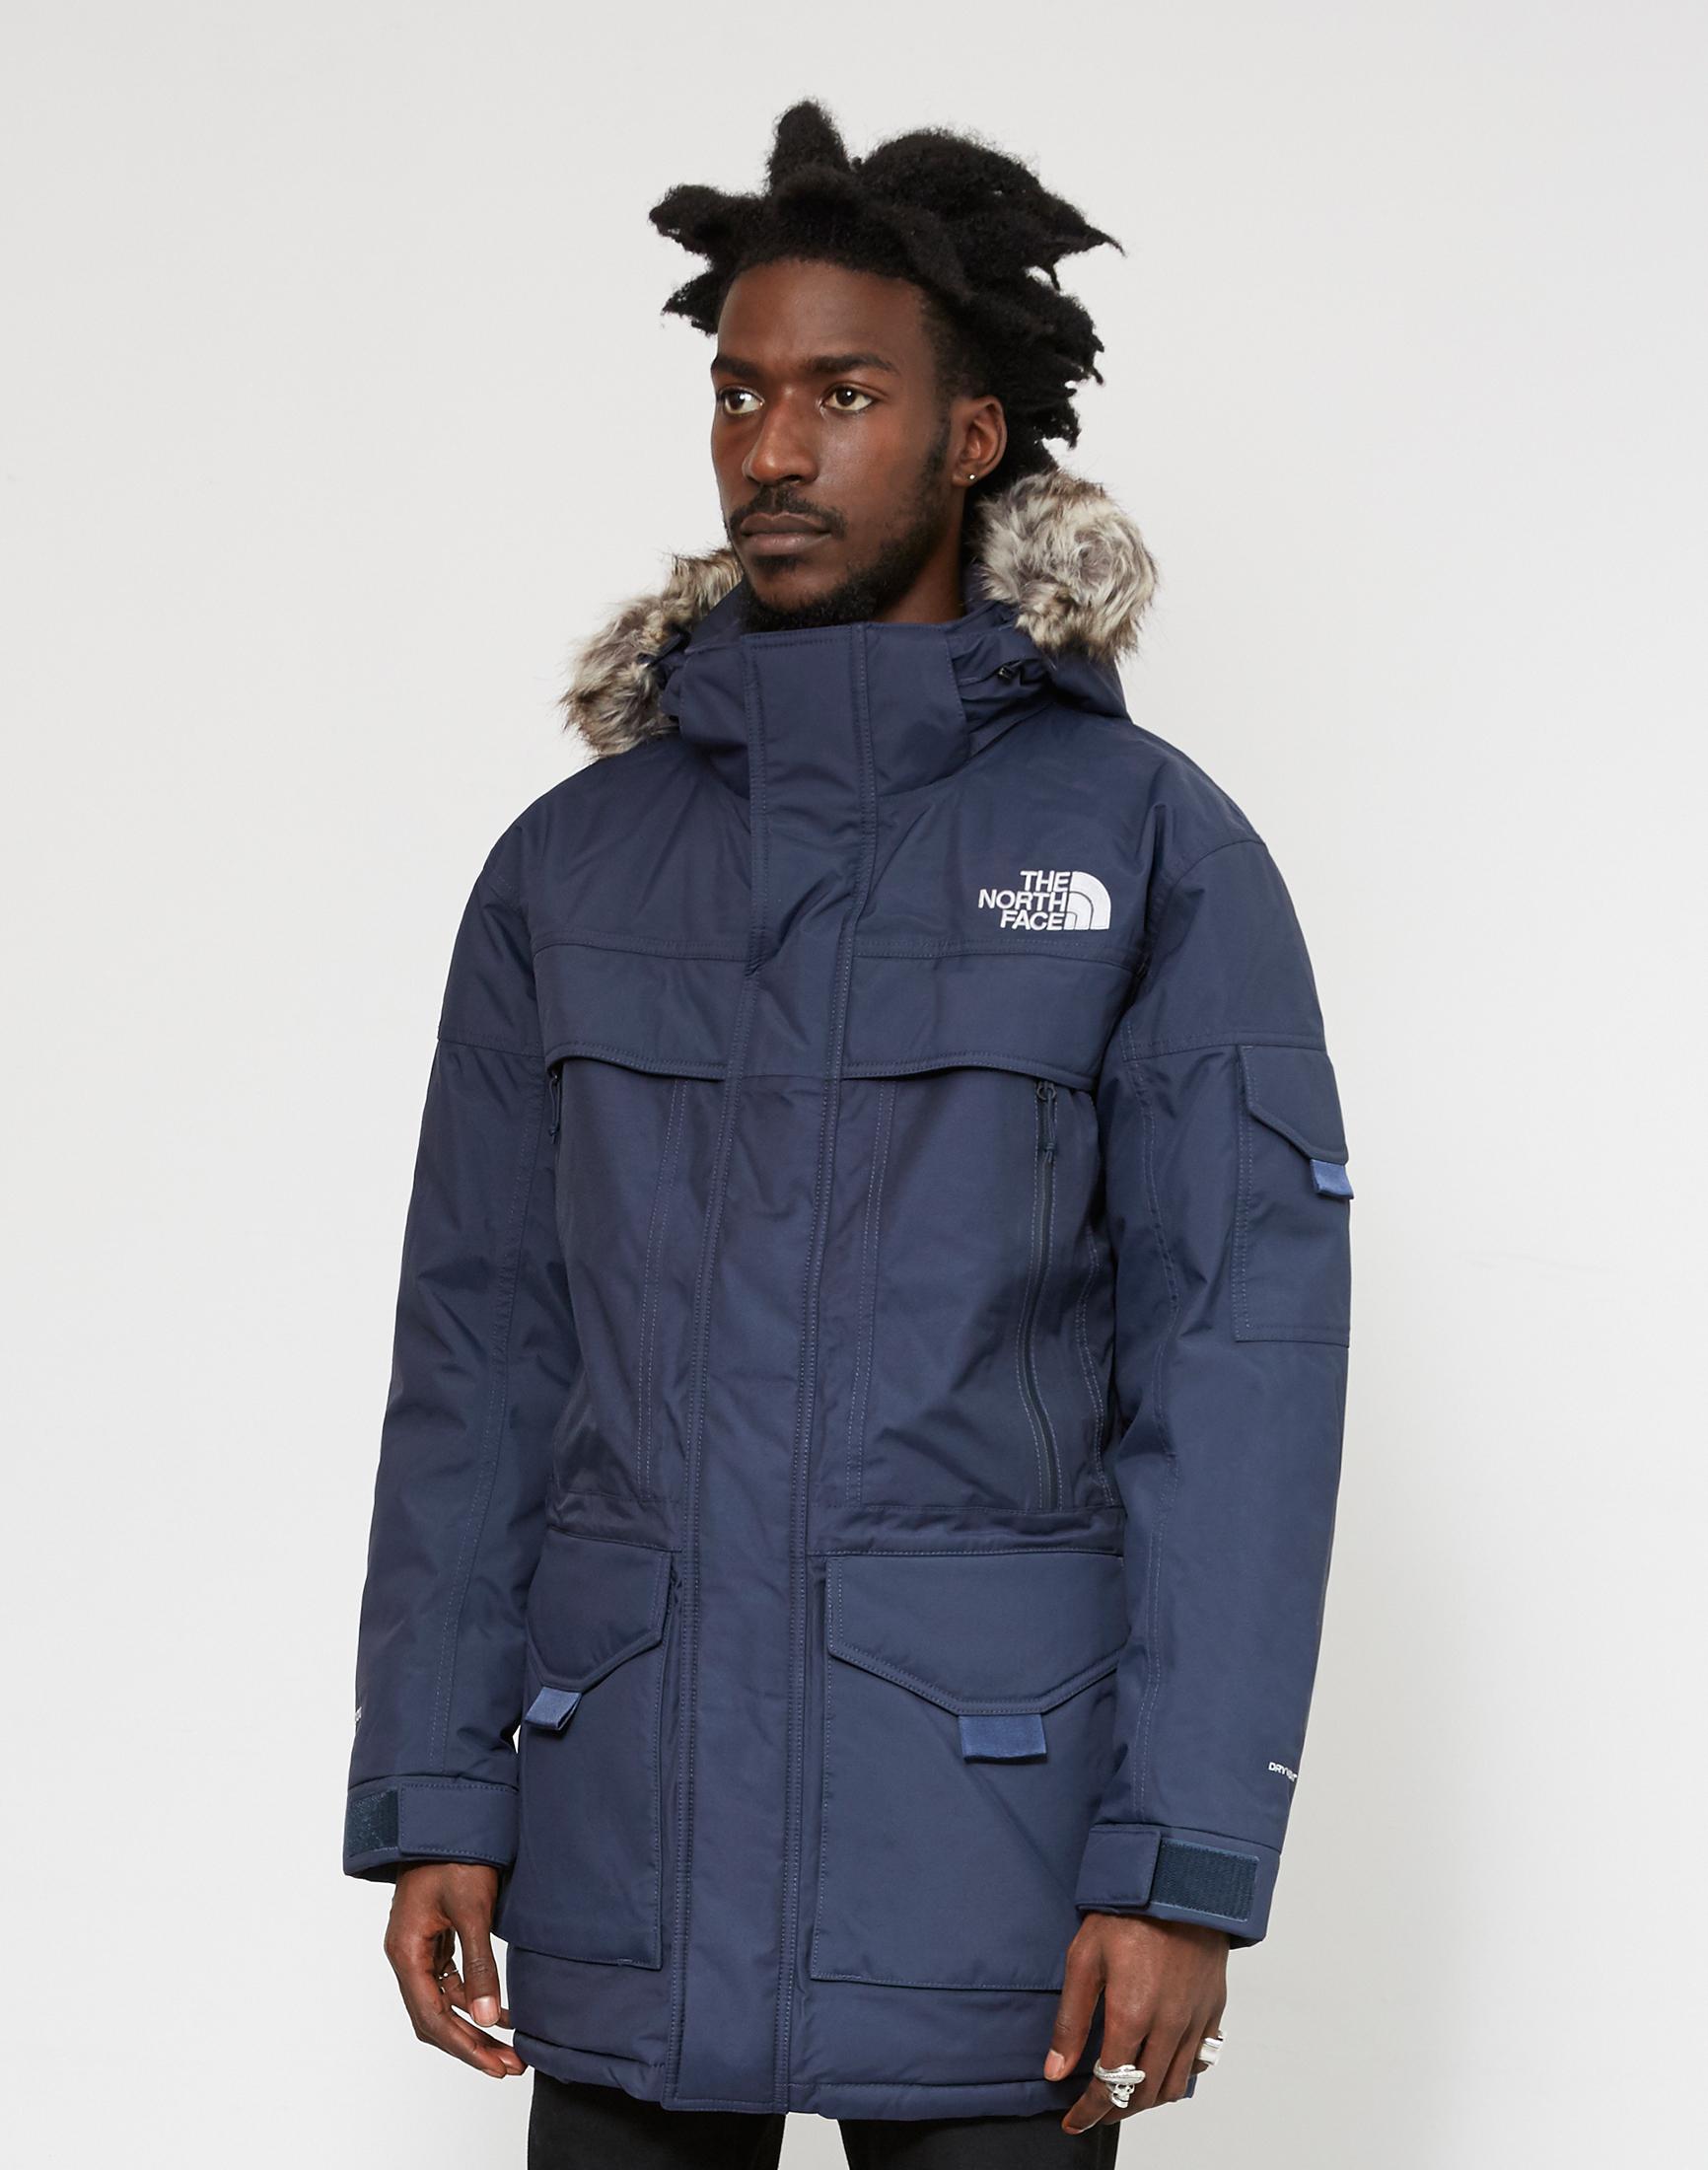 Lyst - The North Face Mcmurdo 2 Parka Navy in Blue for Men